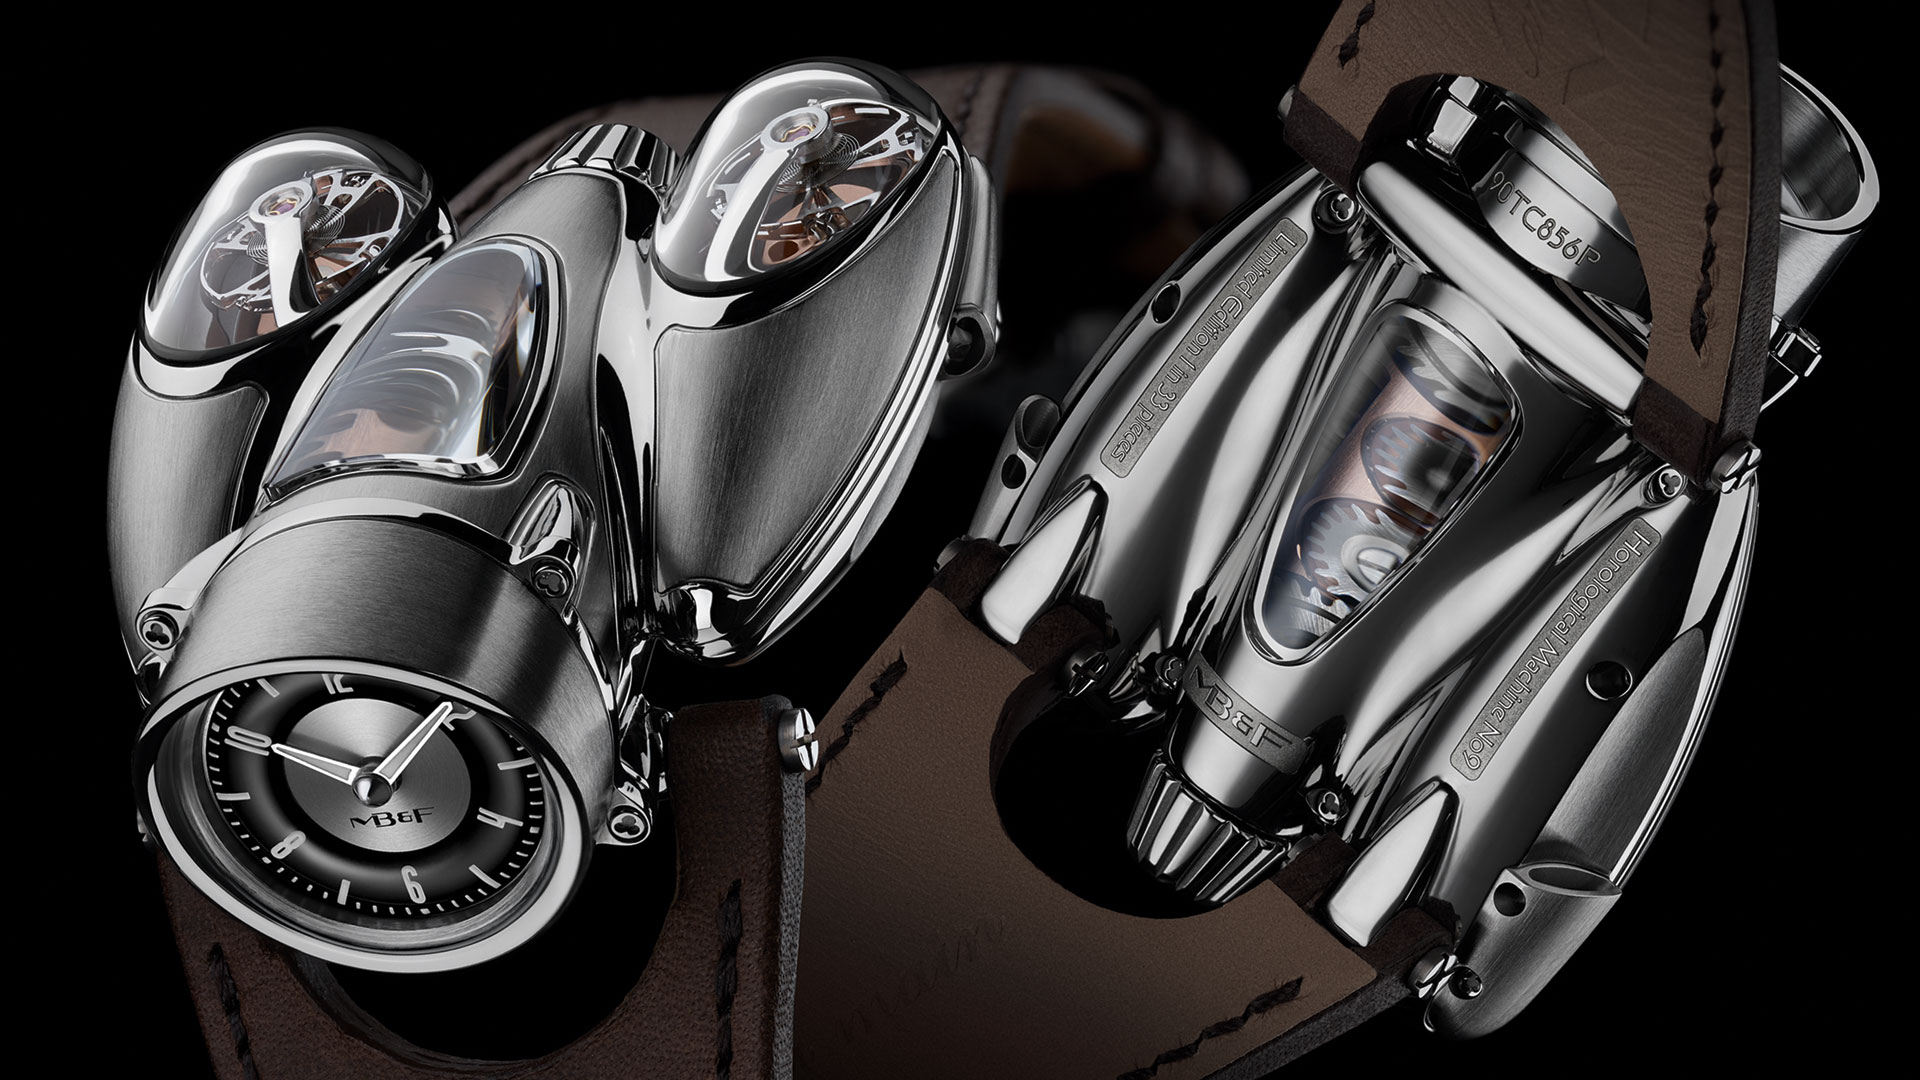 MB&F Horological Machine No. 9 ‘HM9’ Flow Watches Debut